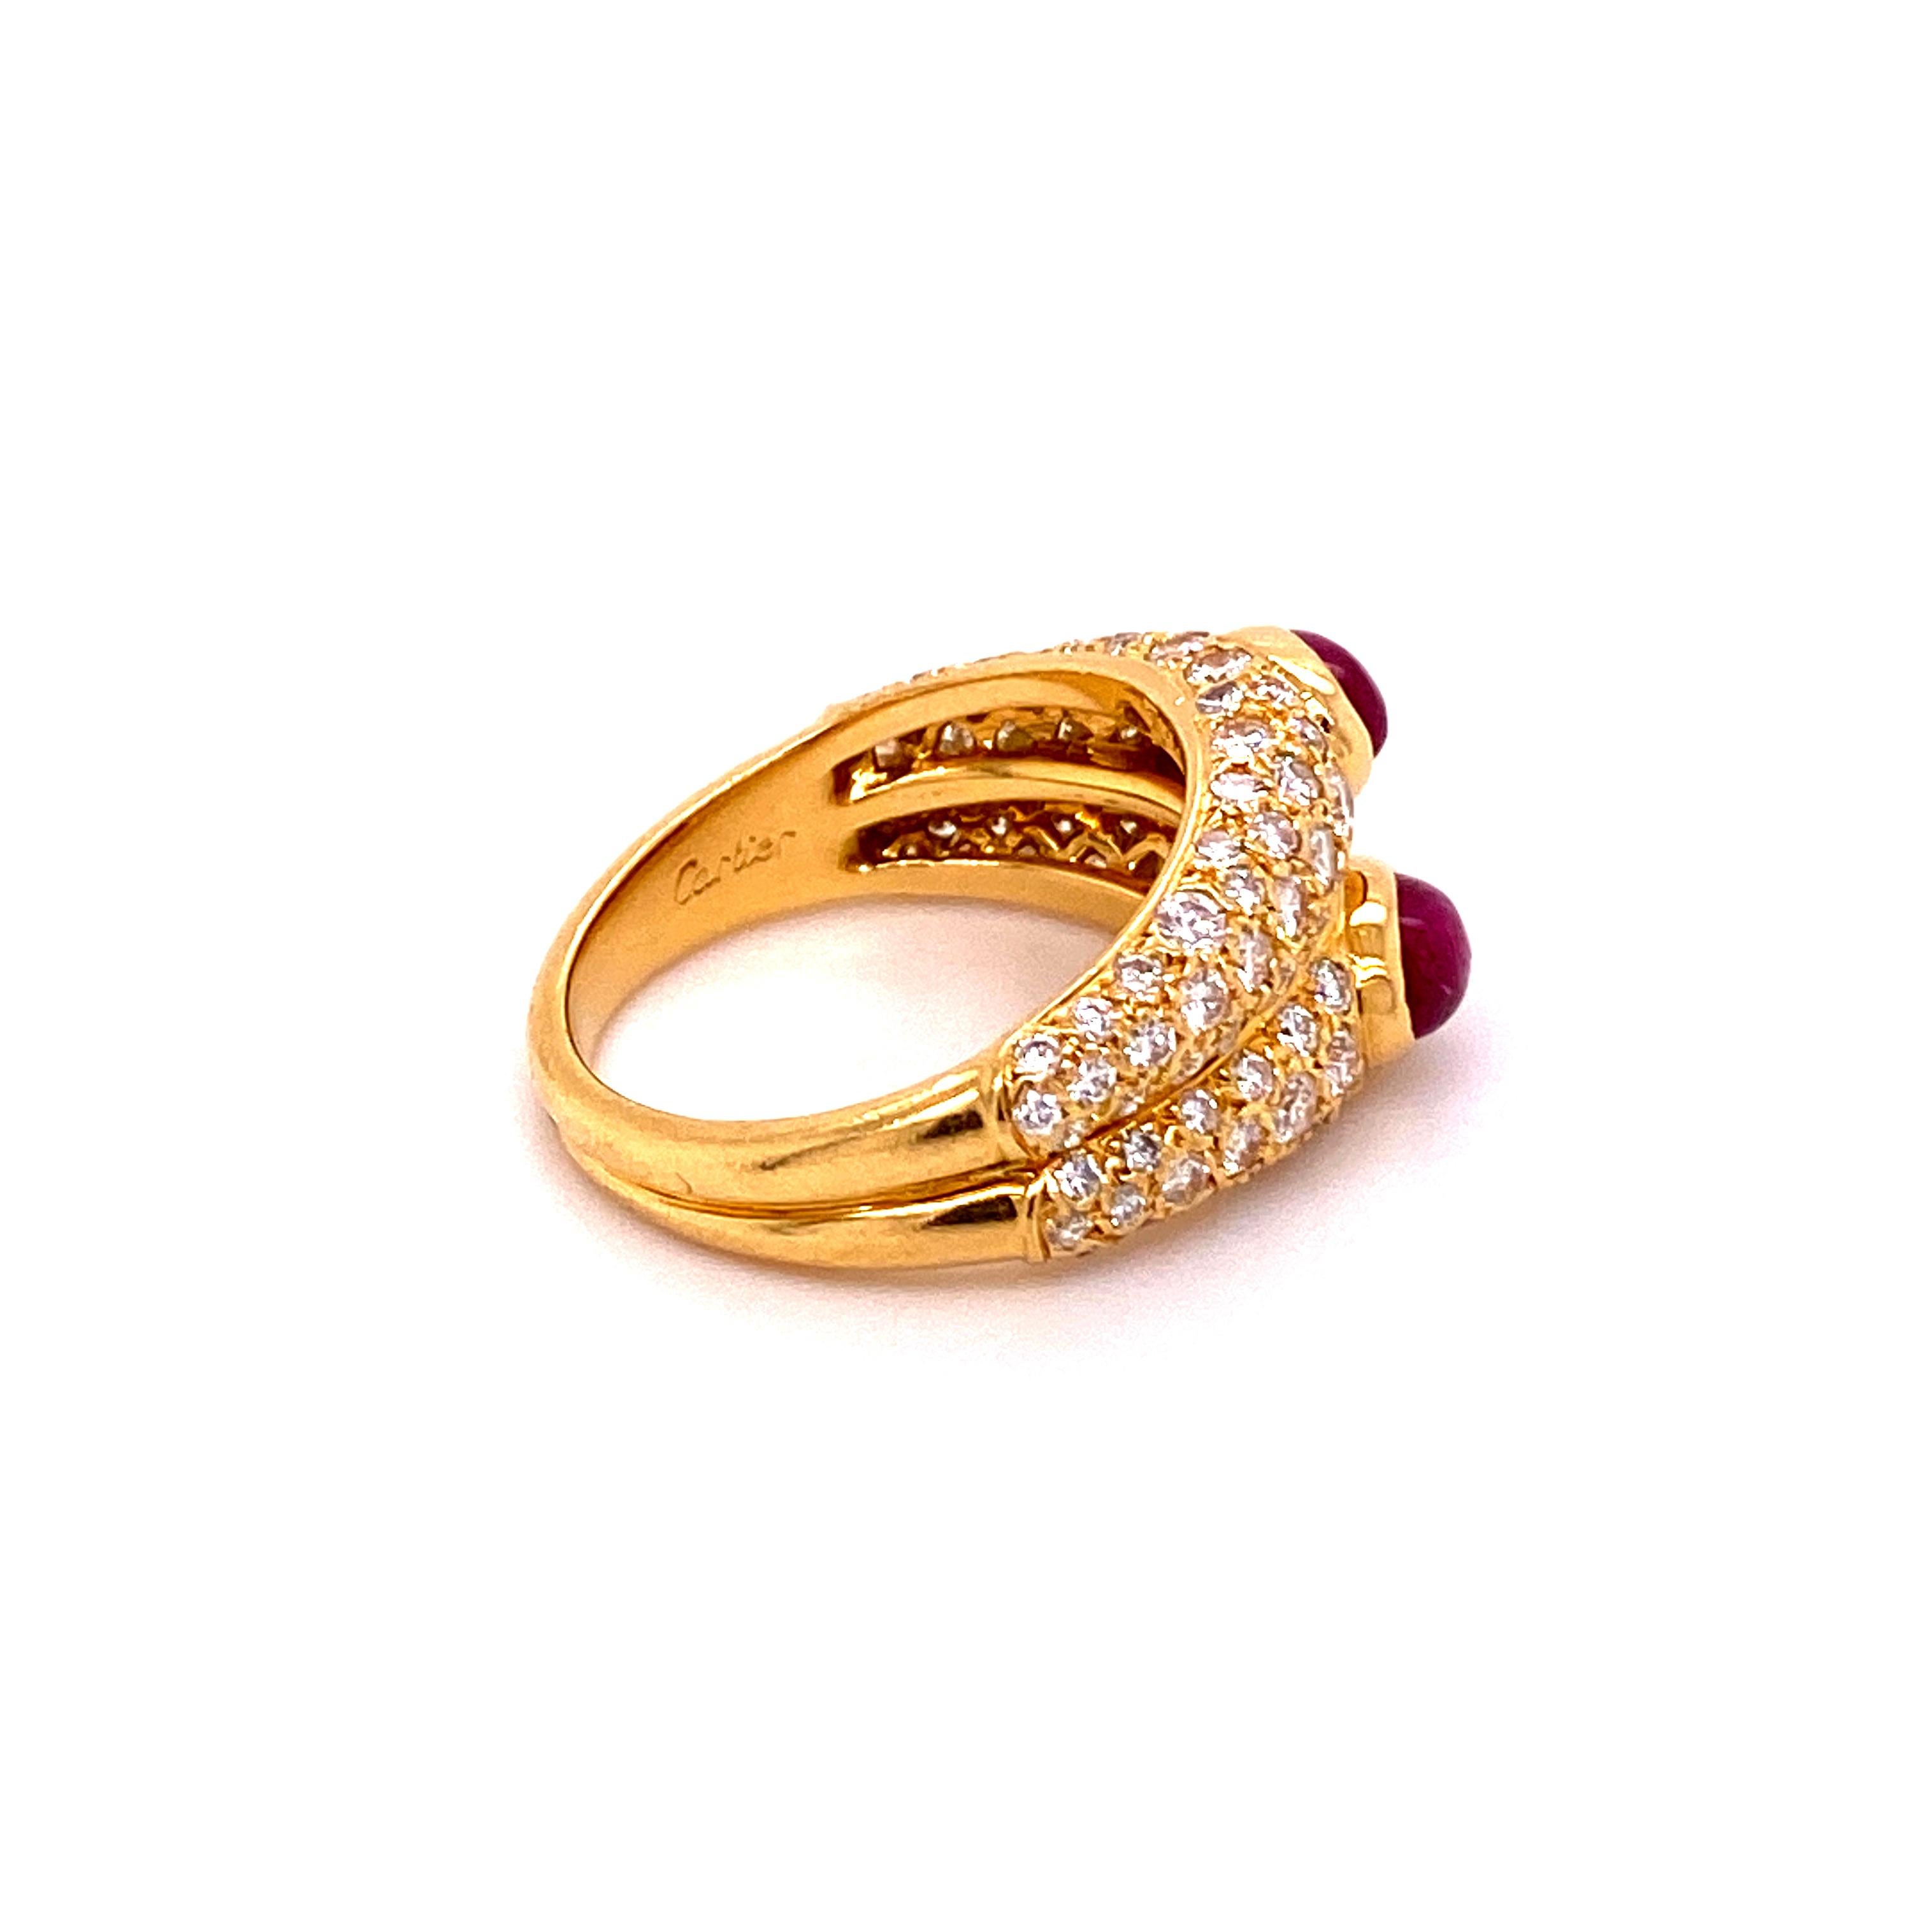 Cabochon Cartier Ruby and Diamond Ring in 18 Karat Yellow Gold